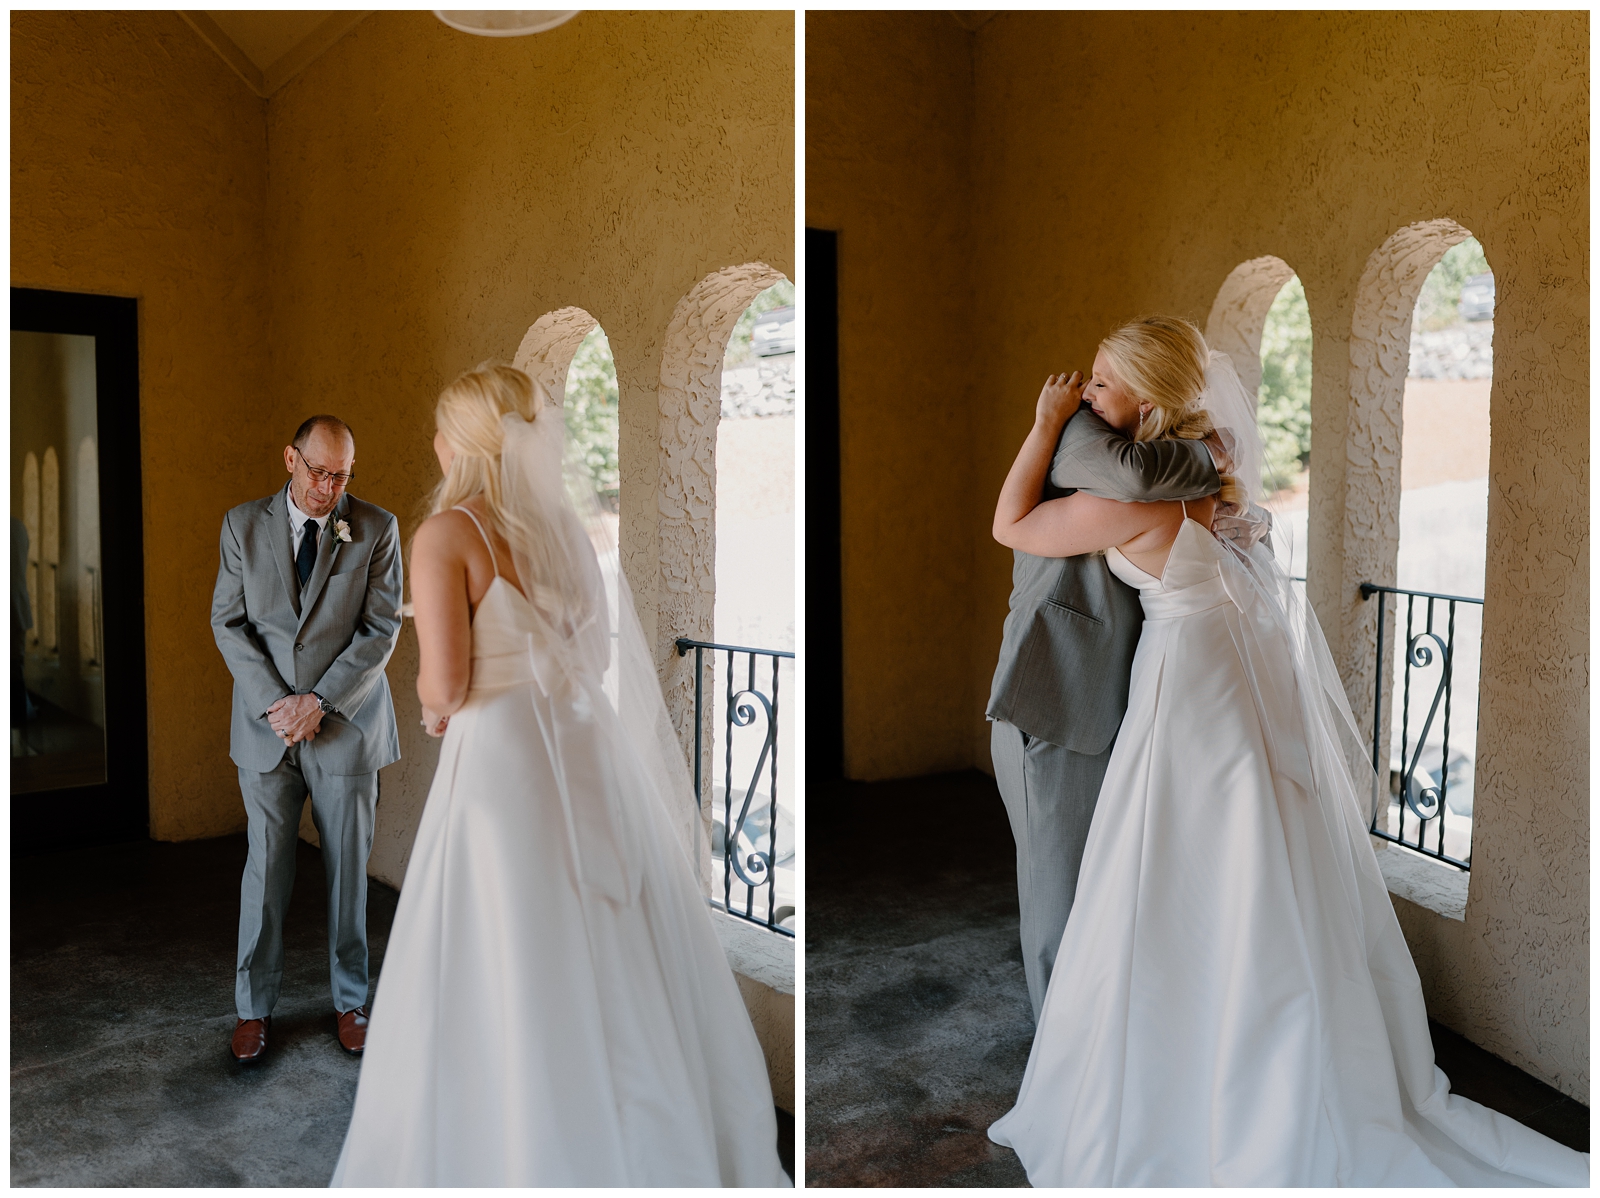 Bride's first look with father at lakeside venue in North Carolina by NC wedding photographer